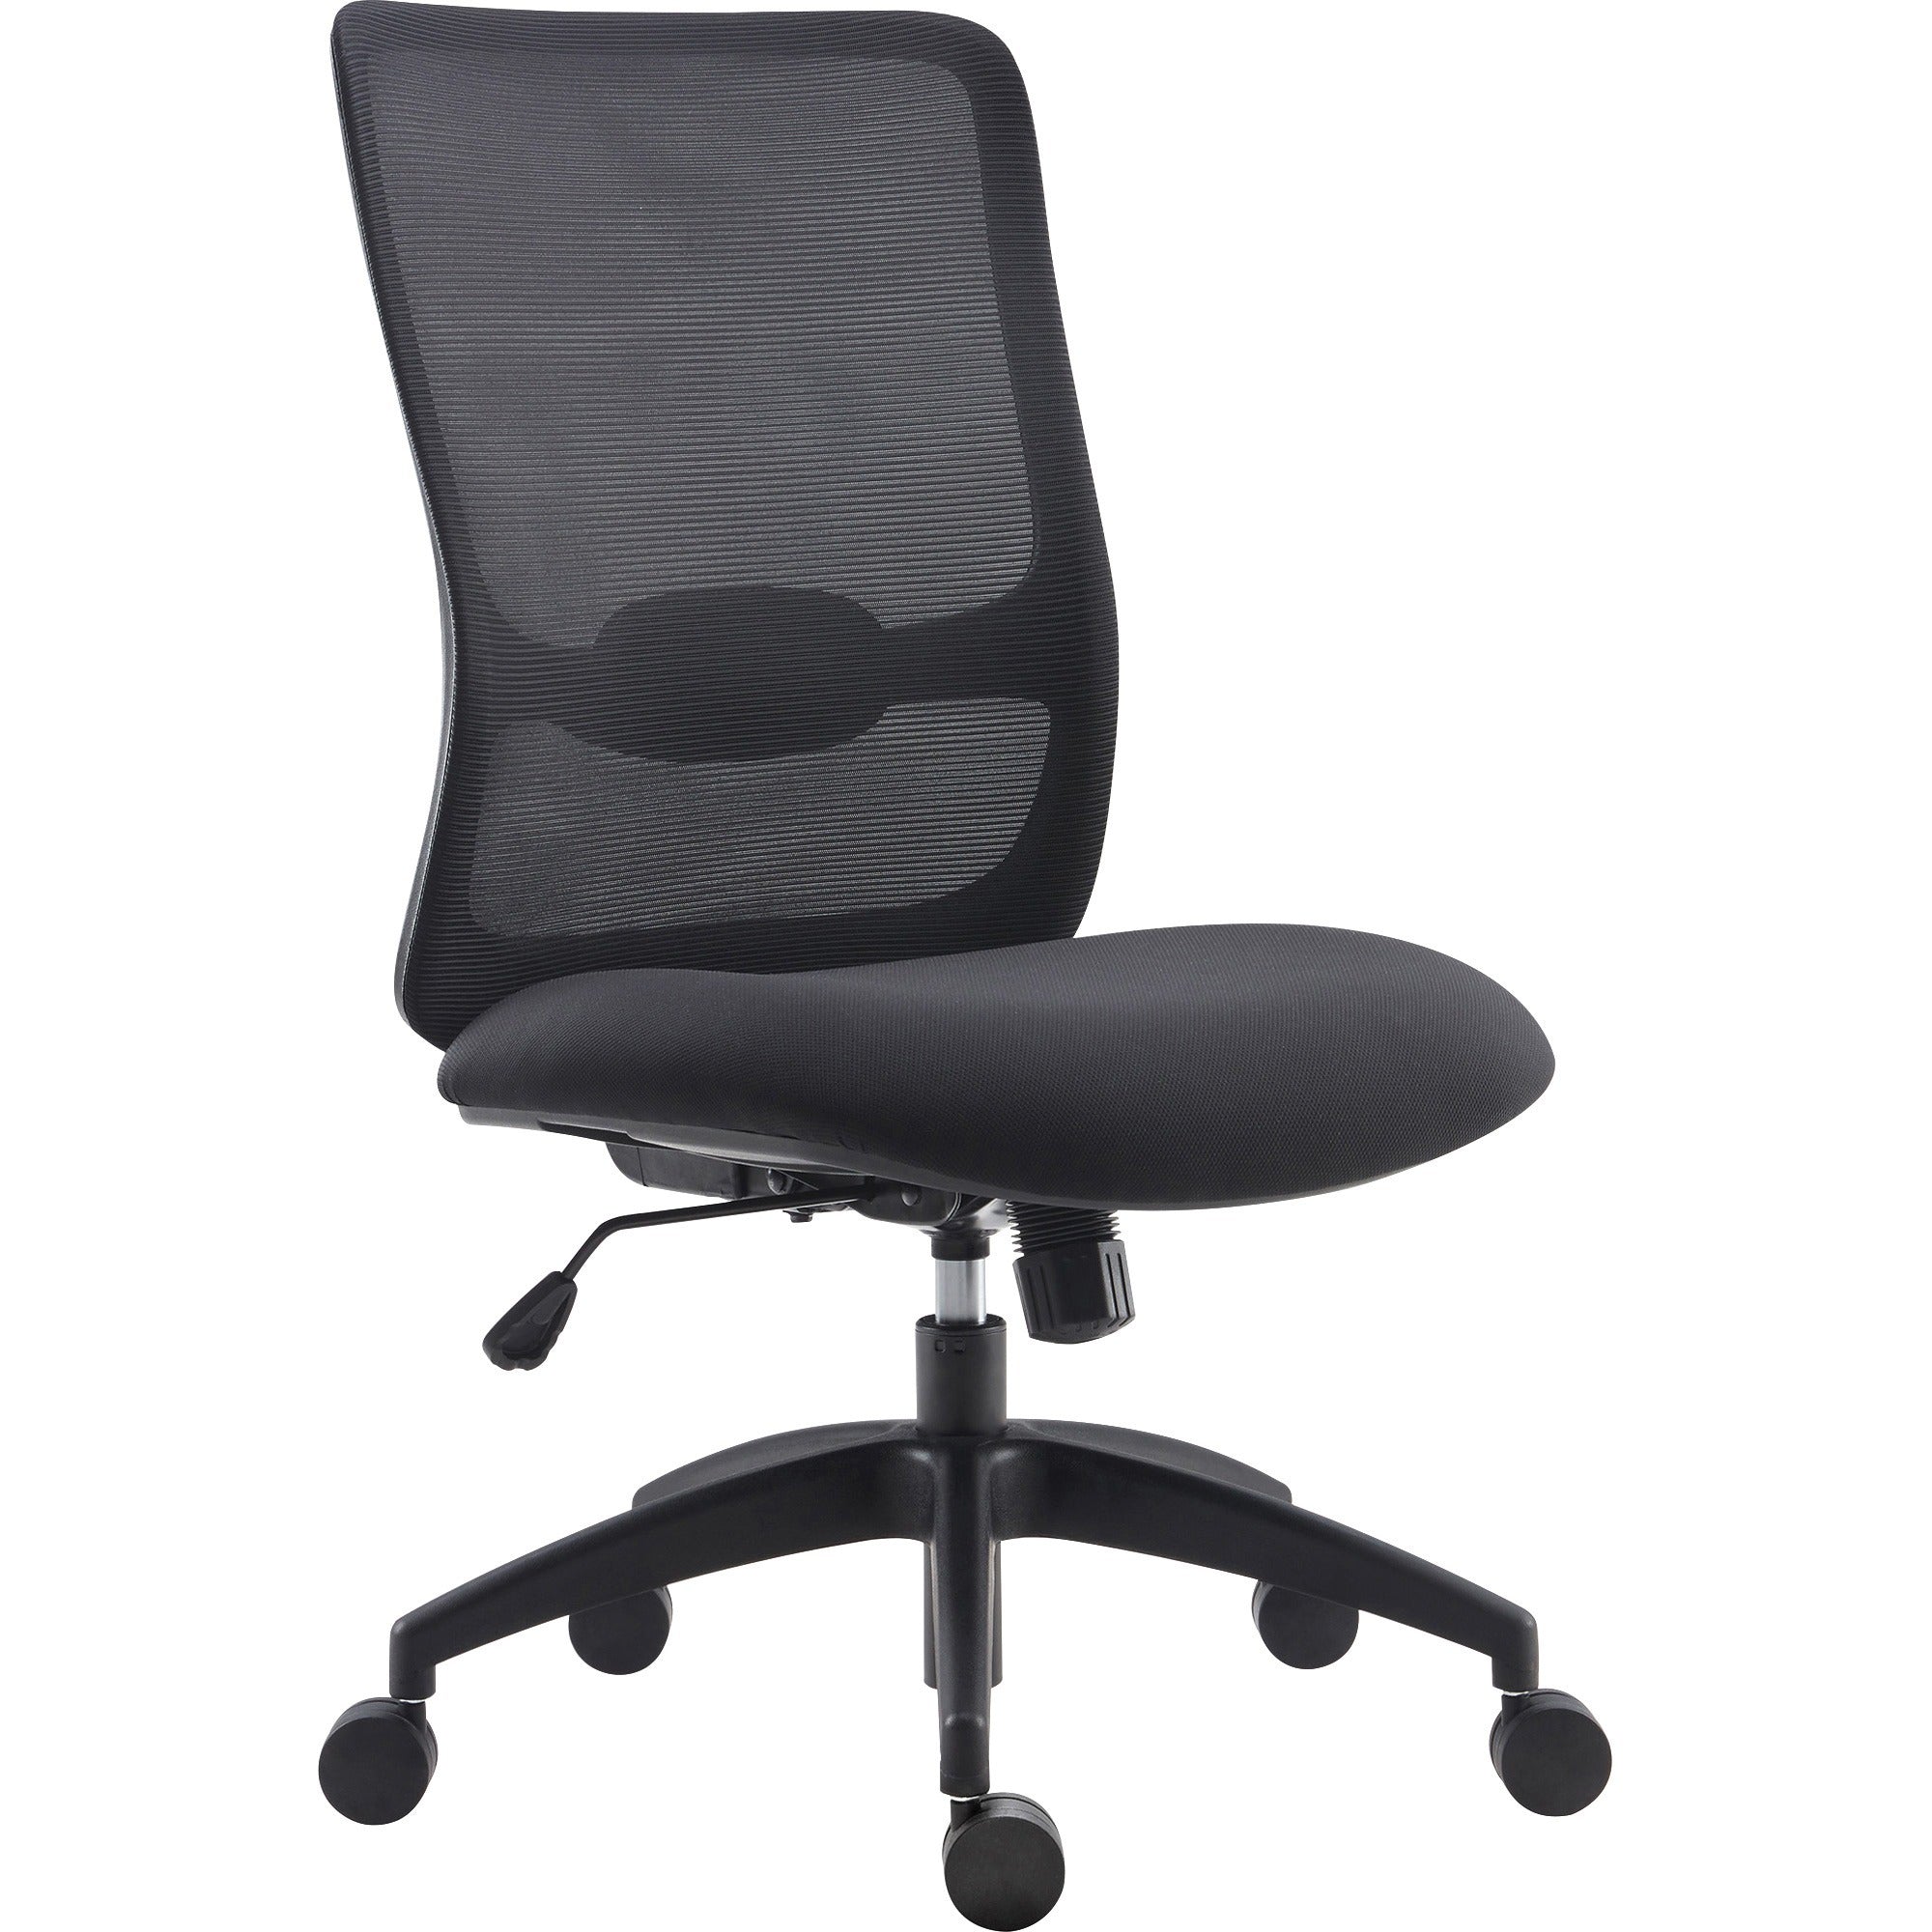 lys-soho-collection-staff-chair-fabric-seat-black-1-each_lysch200mnbk - 1